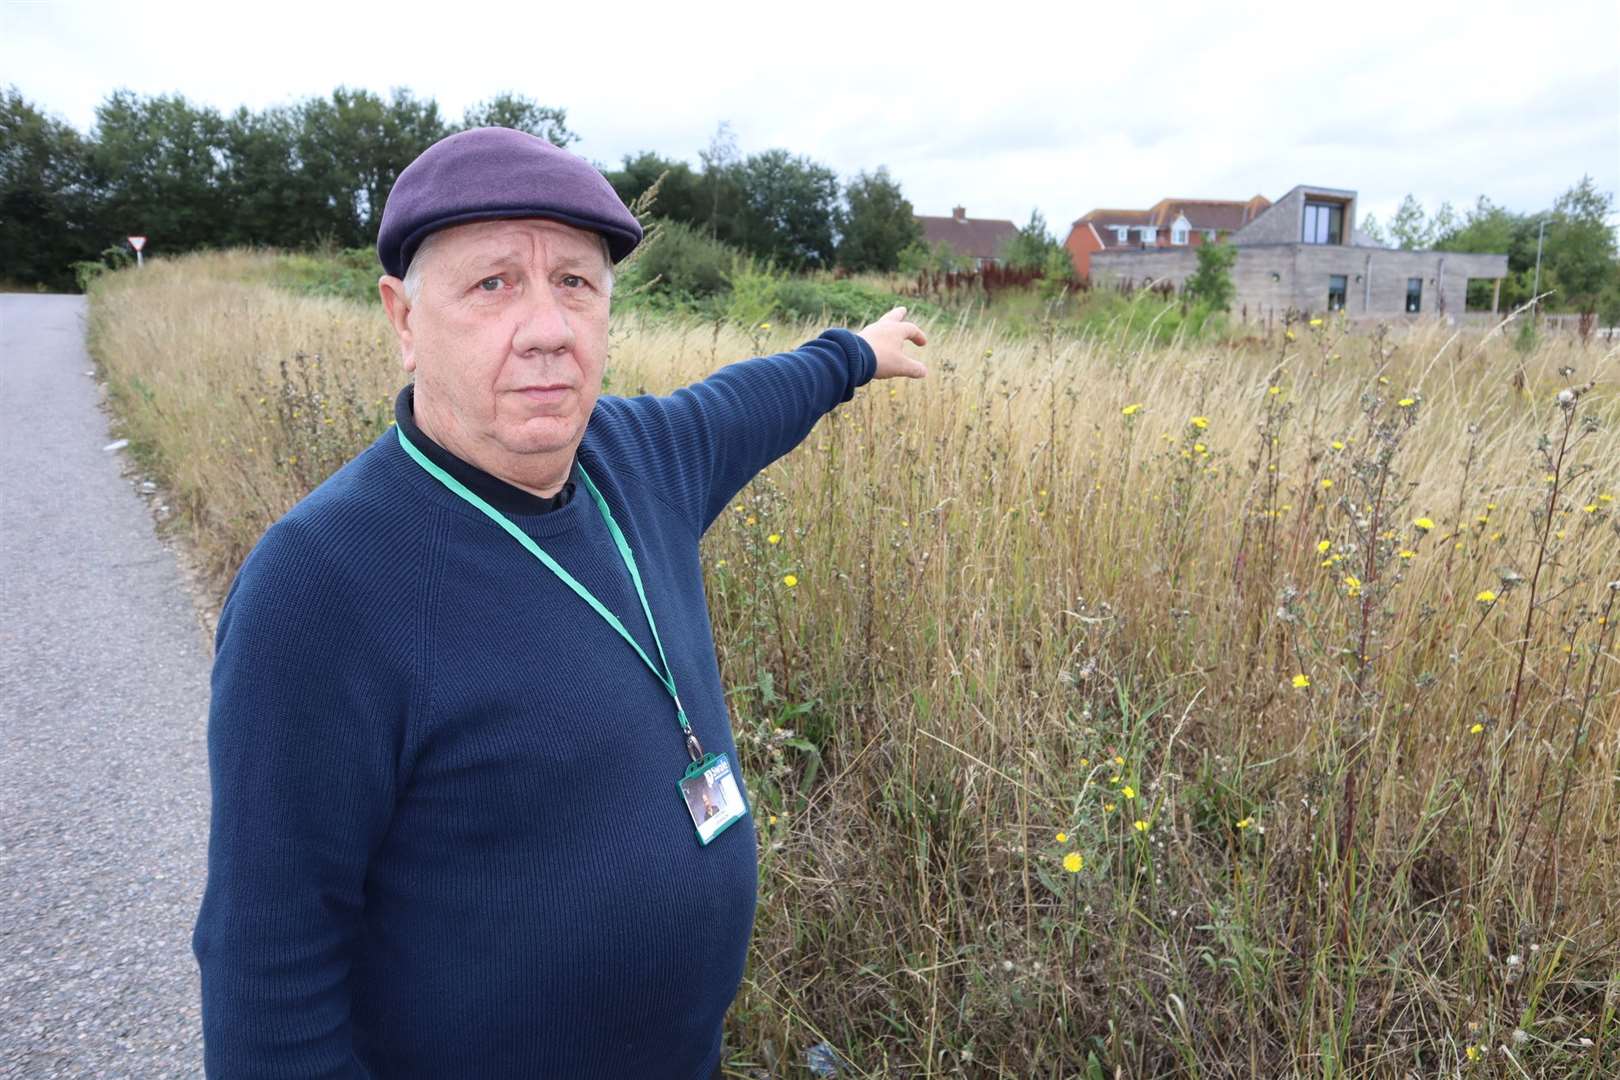 Cllr James Hall has heard from many residents about the problem and even seen a young child swimming in the lake